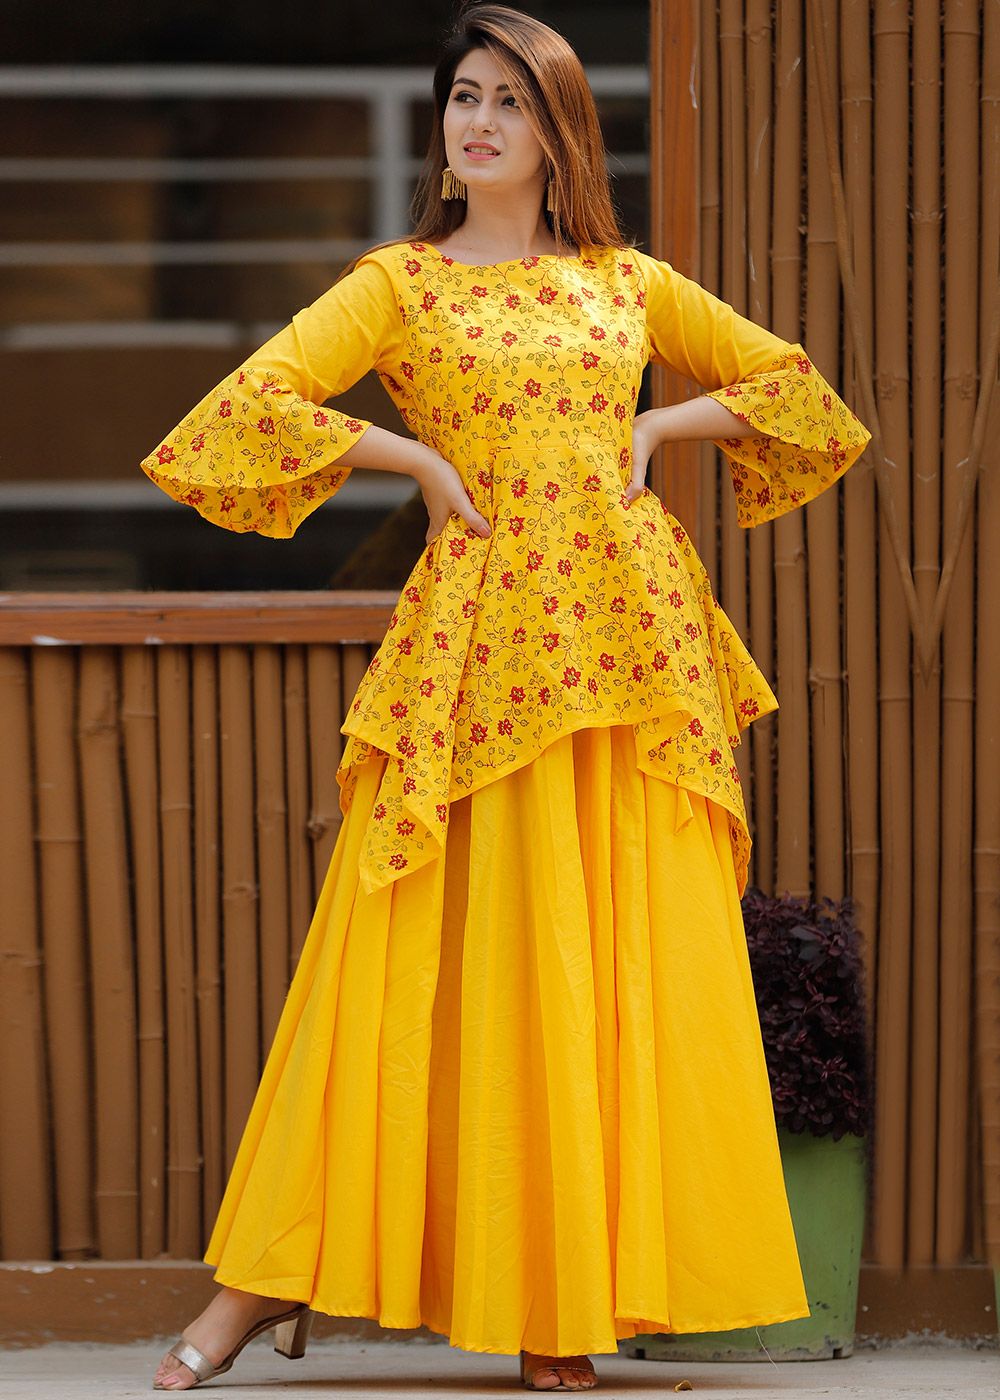 20 Latest Kurti with Skirt Designs trending right now - Fashion Qween